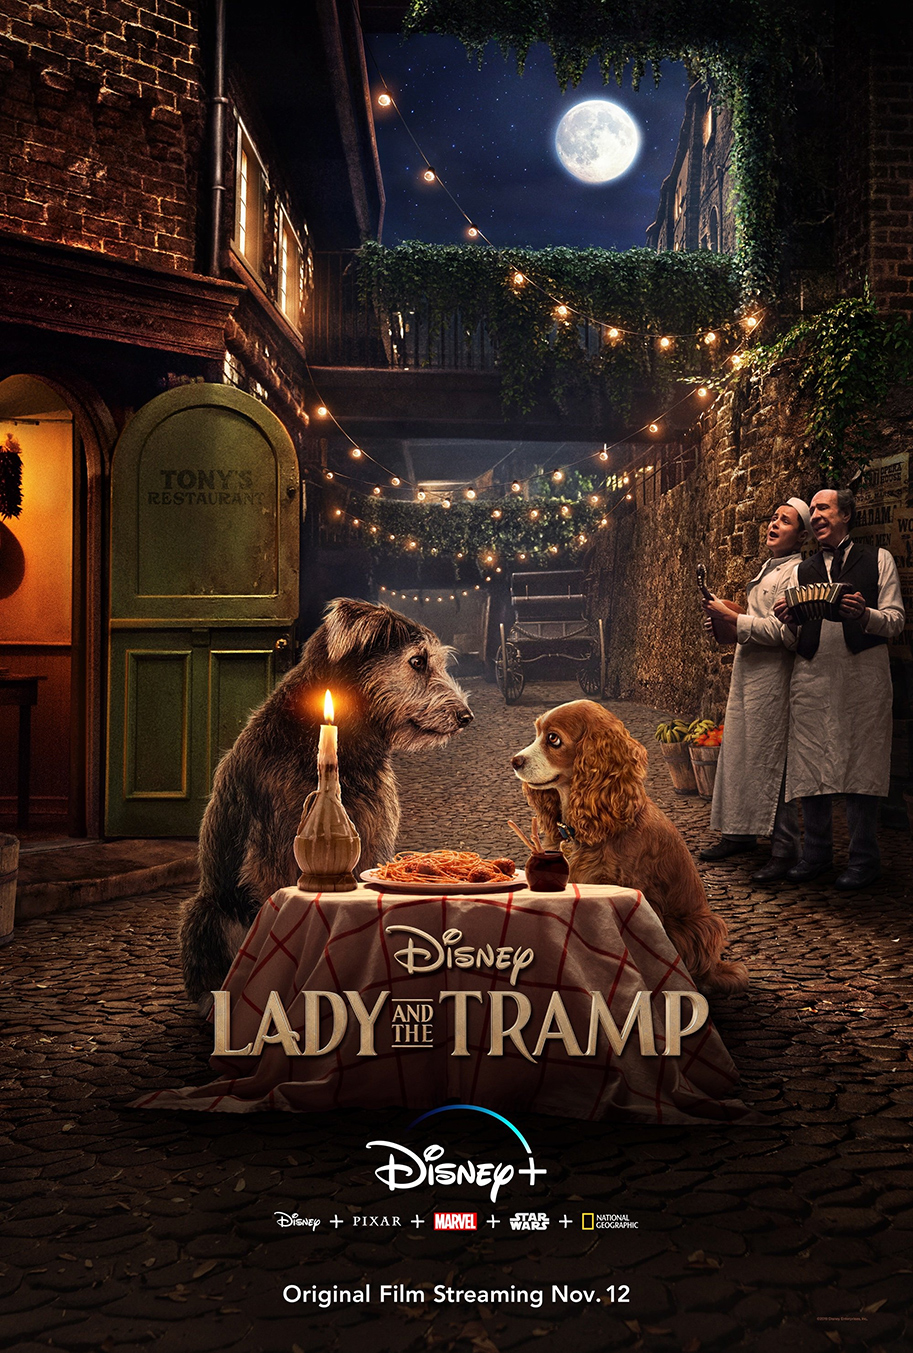 Lady and the Tramp, Disney+, poster